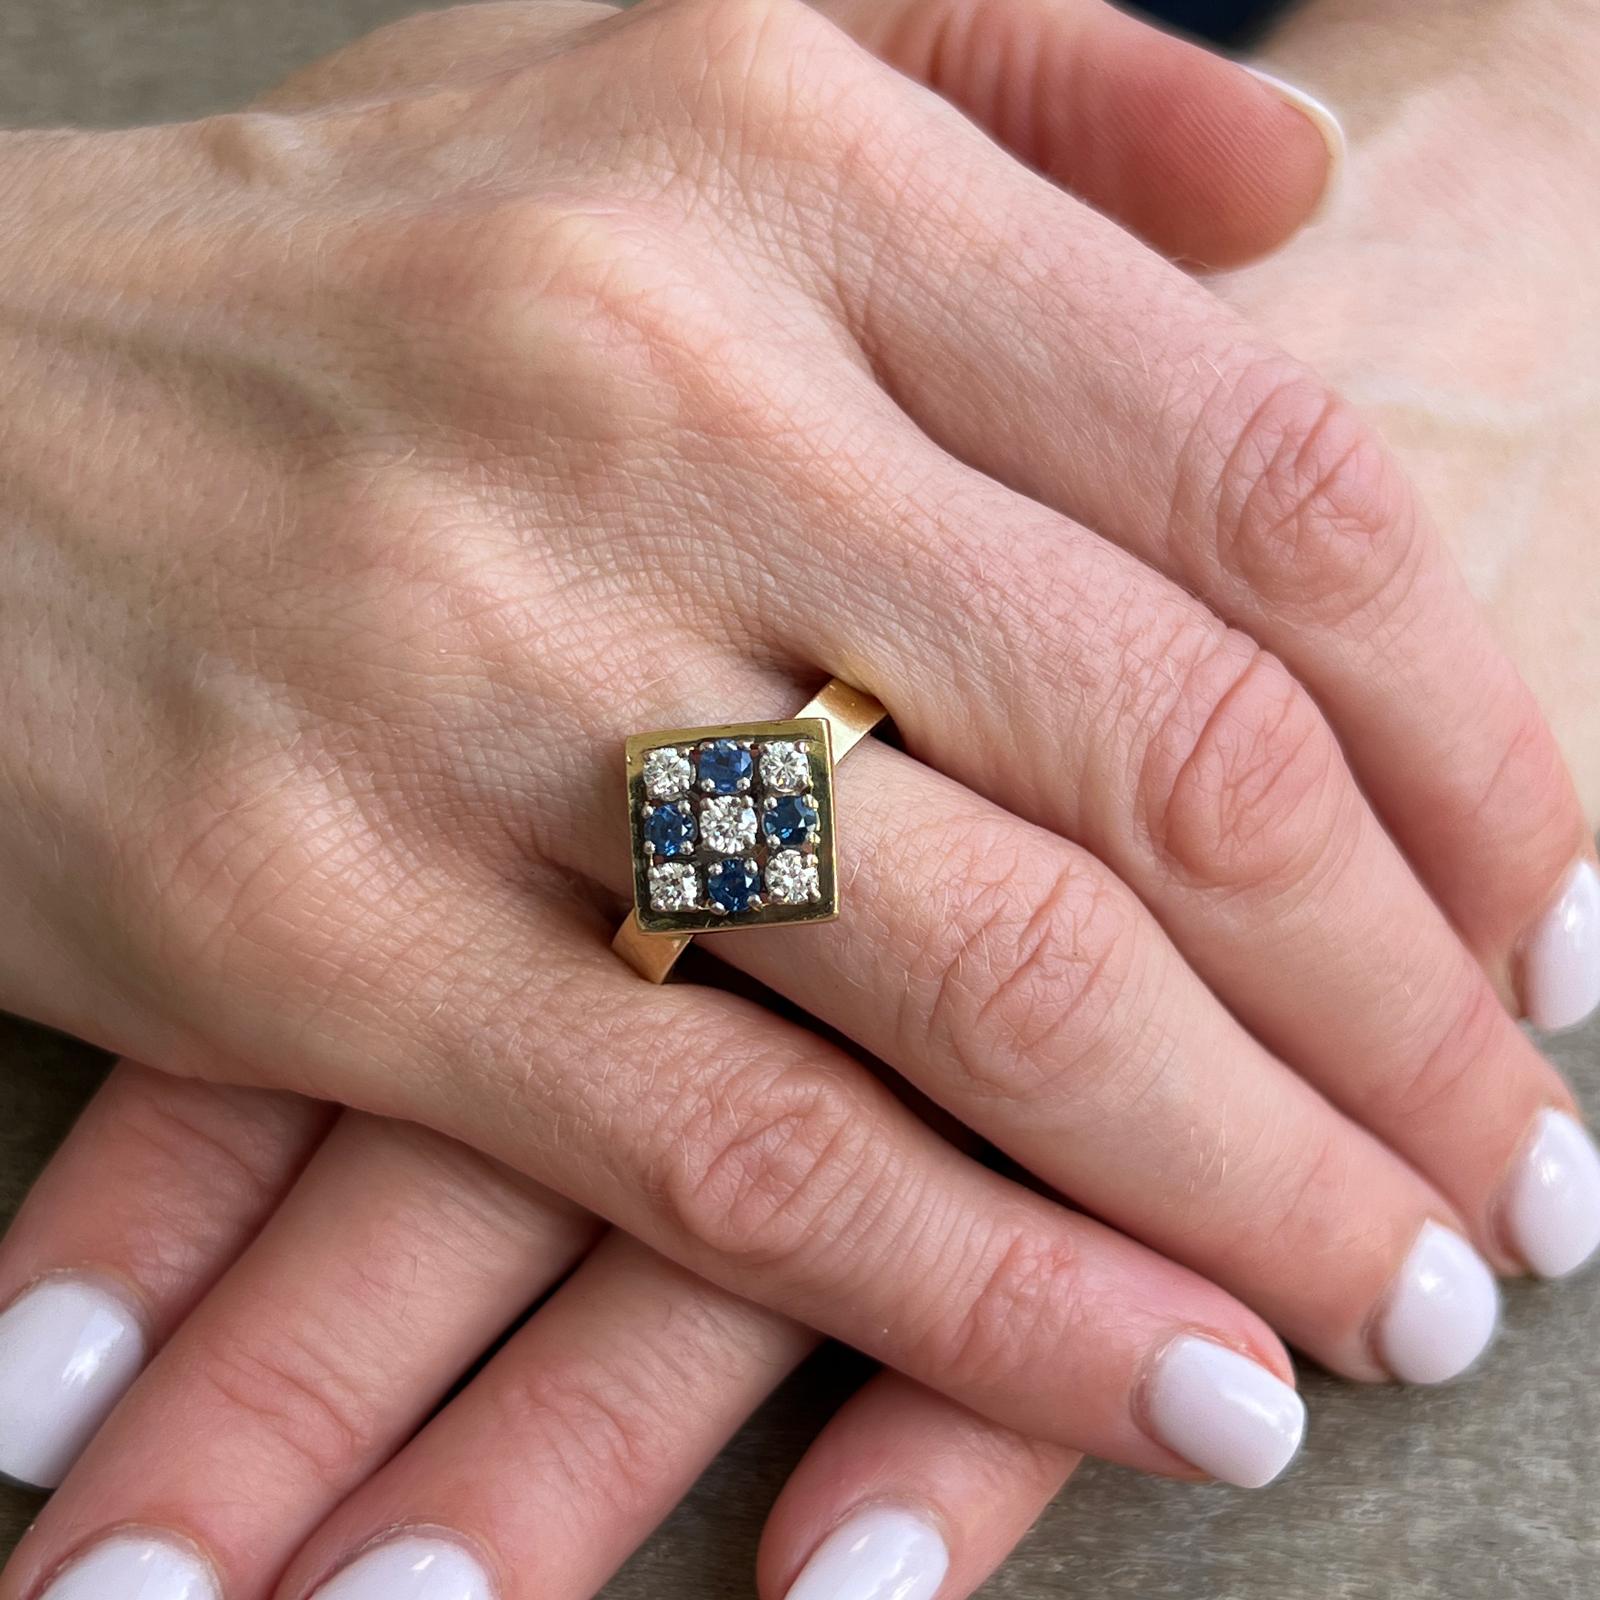 Fabulous checkerboard sapphire diamond vintage ring crafted in 18 karat yellow gold. The ring features 5 round brilliant cut diamods and 4 round natural blue sapphires. The diamonds weigh approximately .35 CTW and are graded I color and VS clarity.